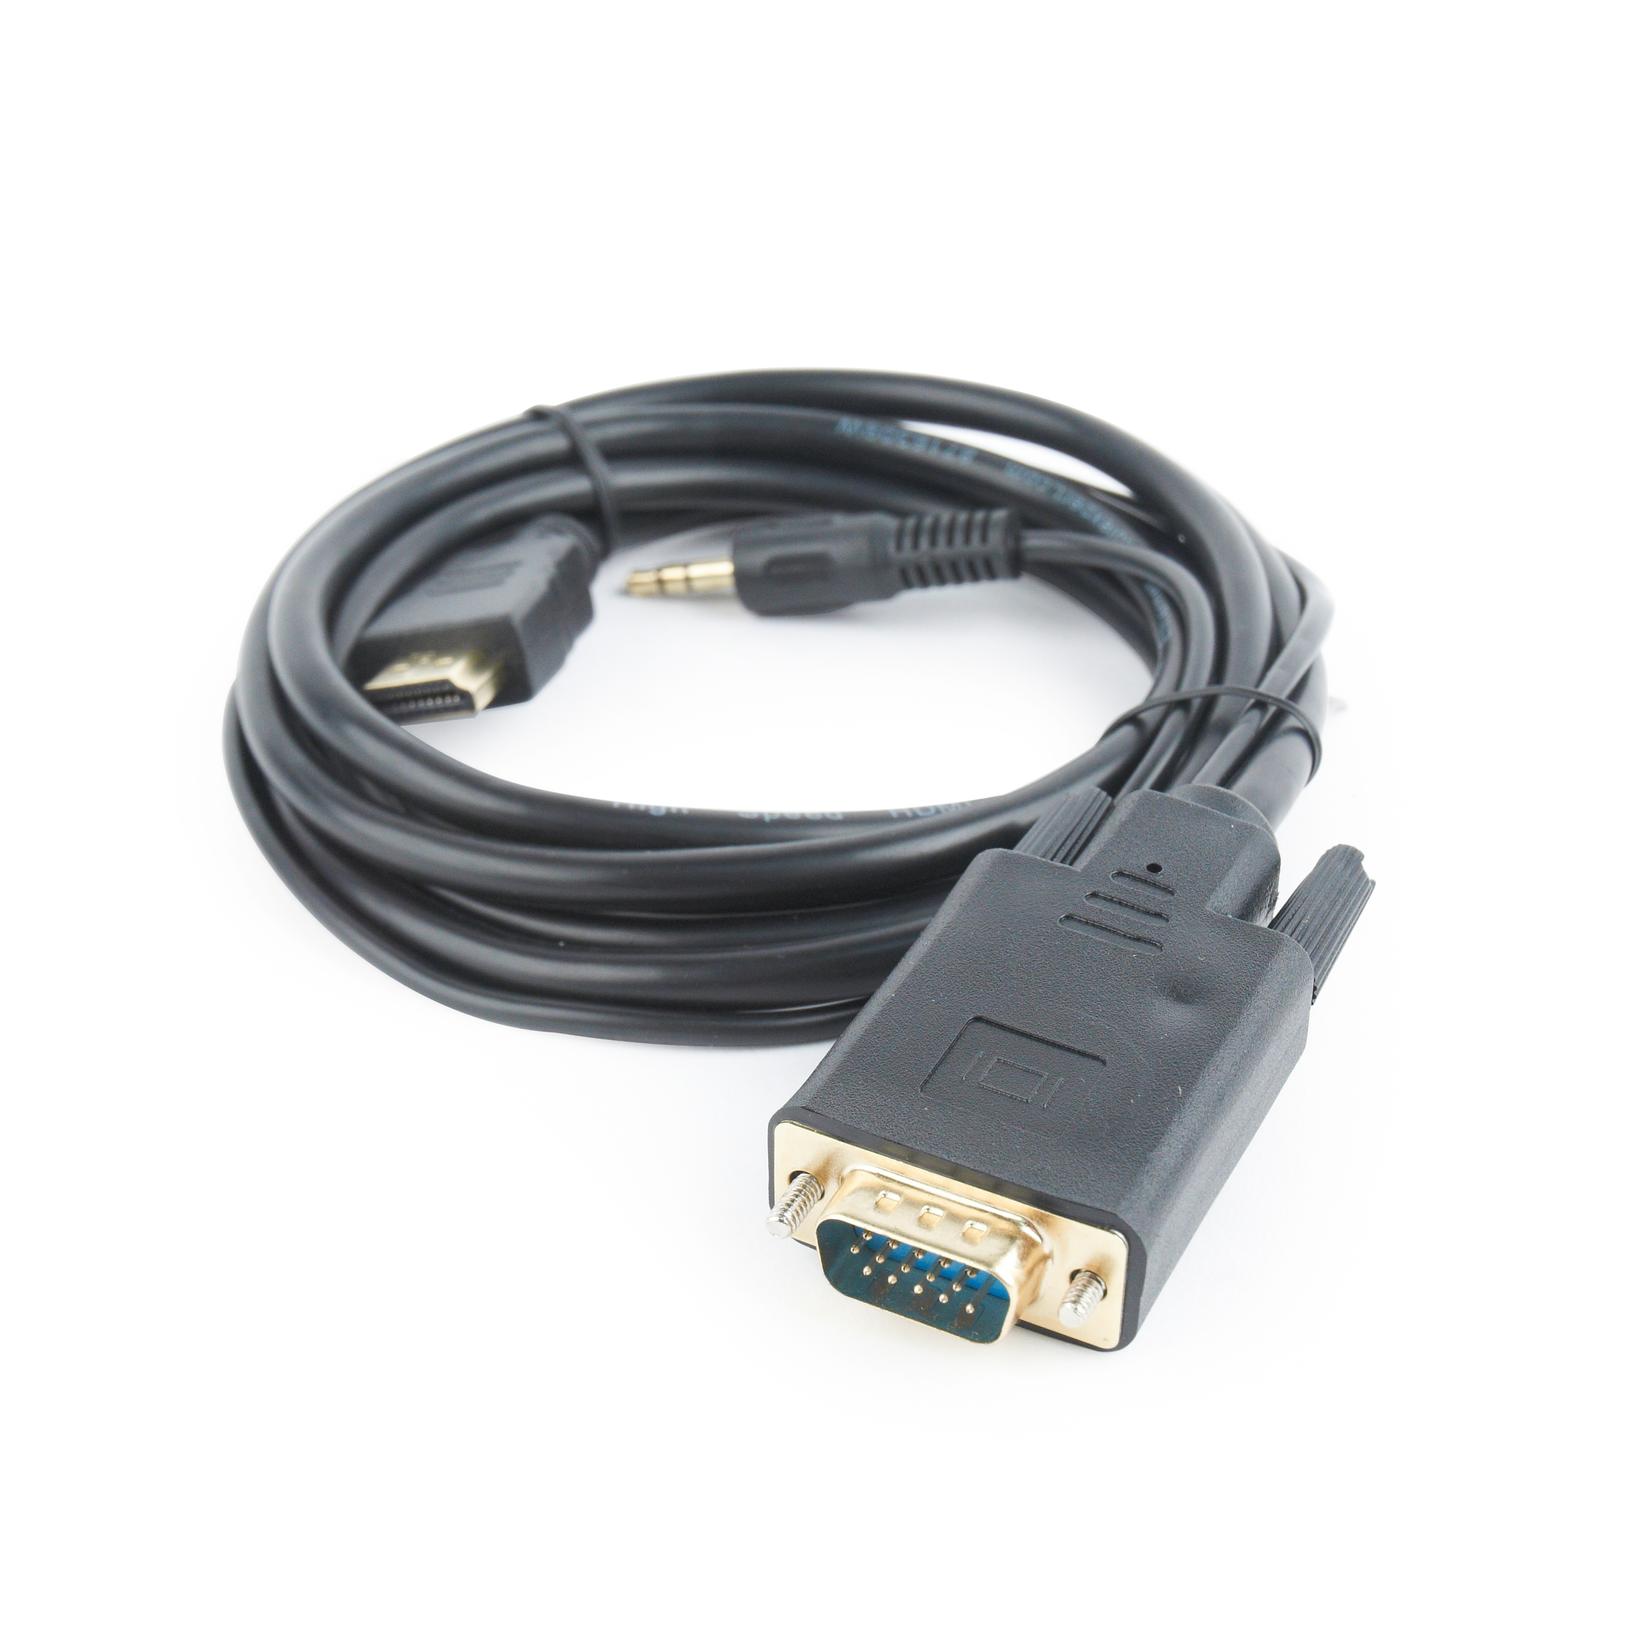 Selected image for Gembird adapter za video kablove 3 m HDMI + + 3.5mm Crno